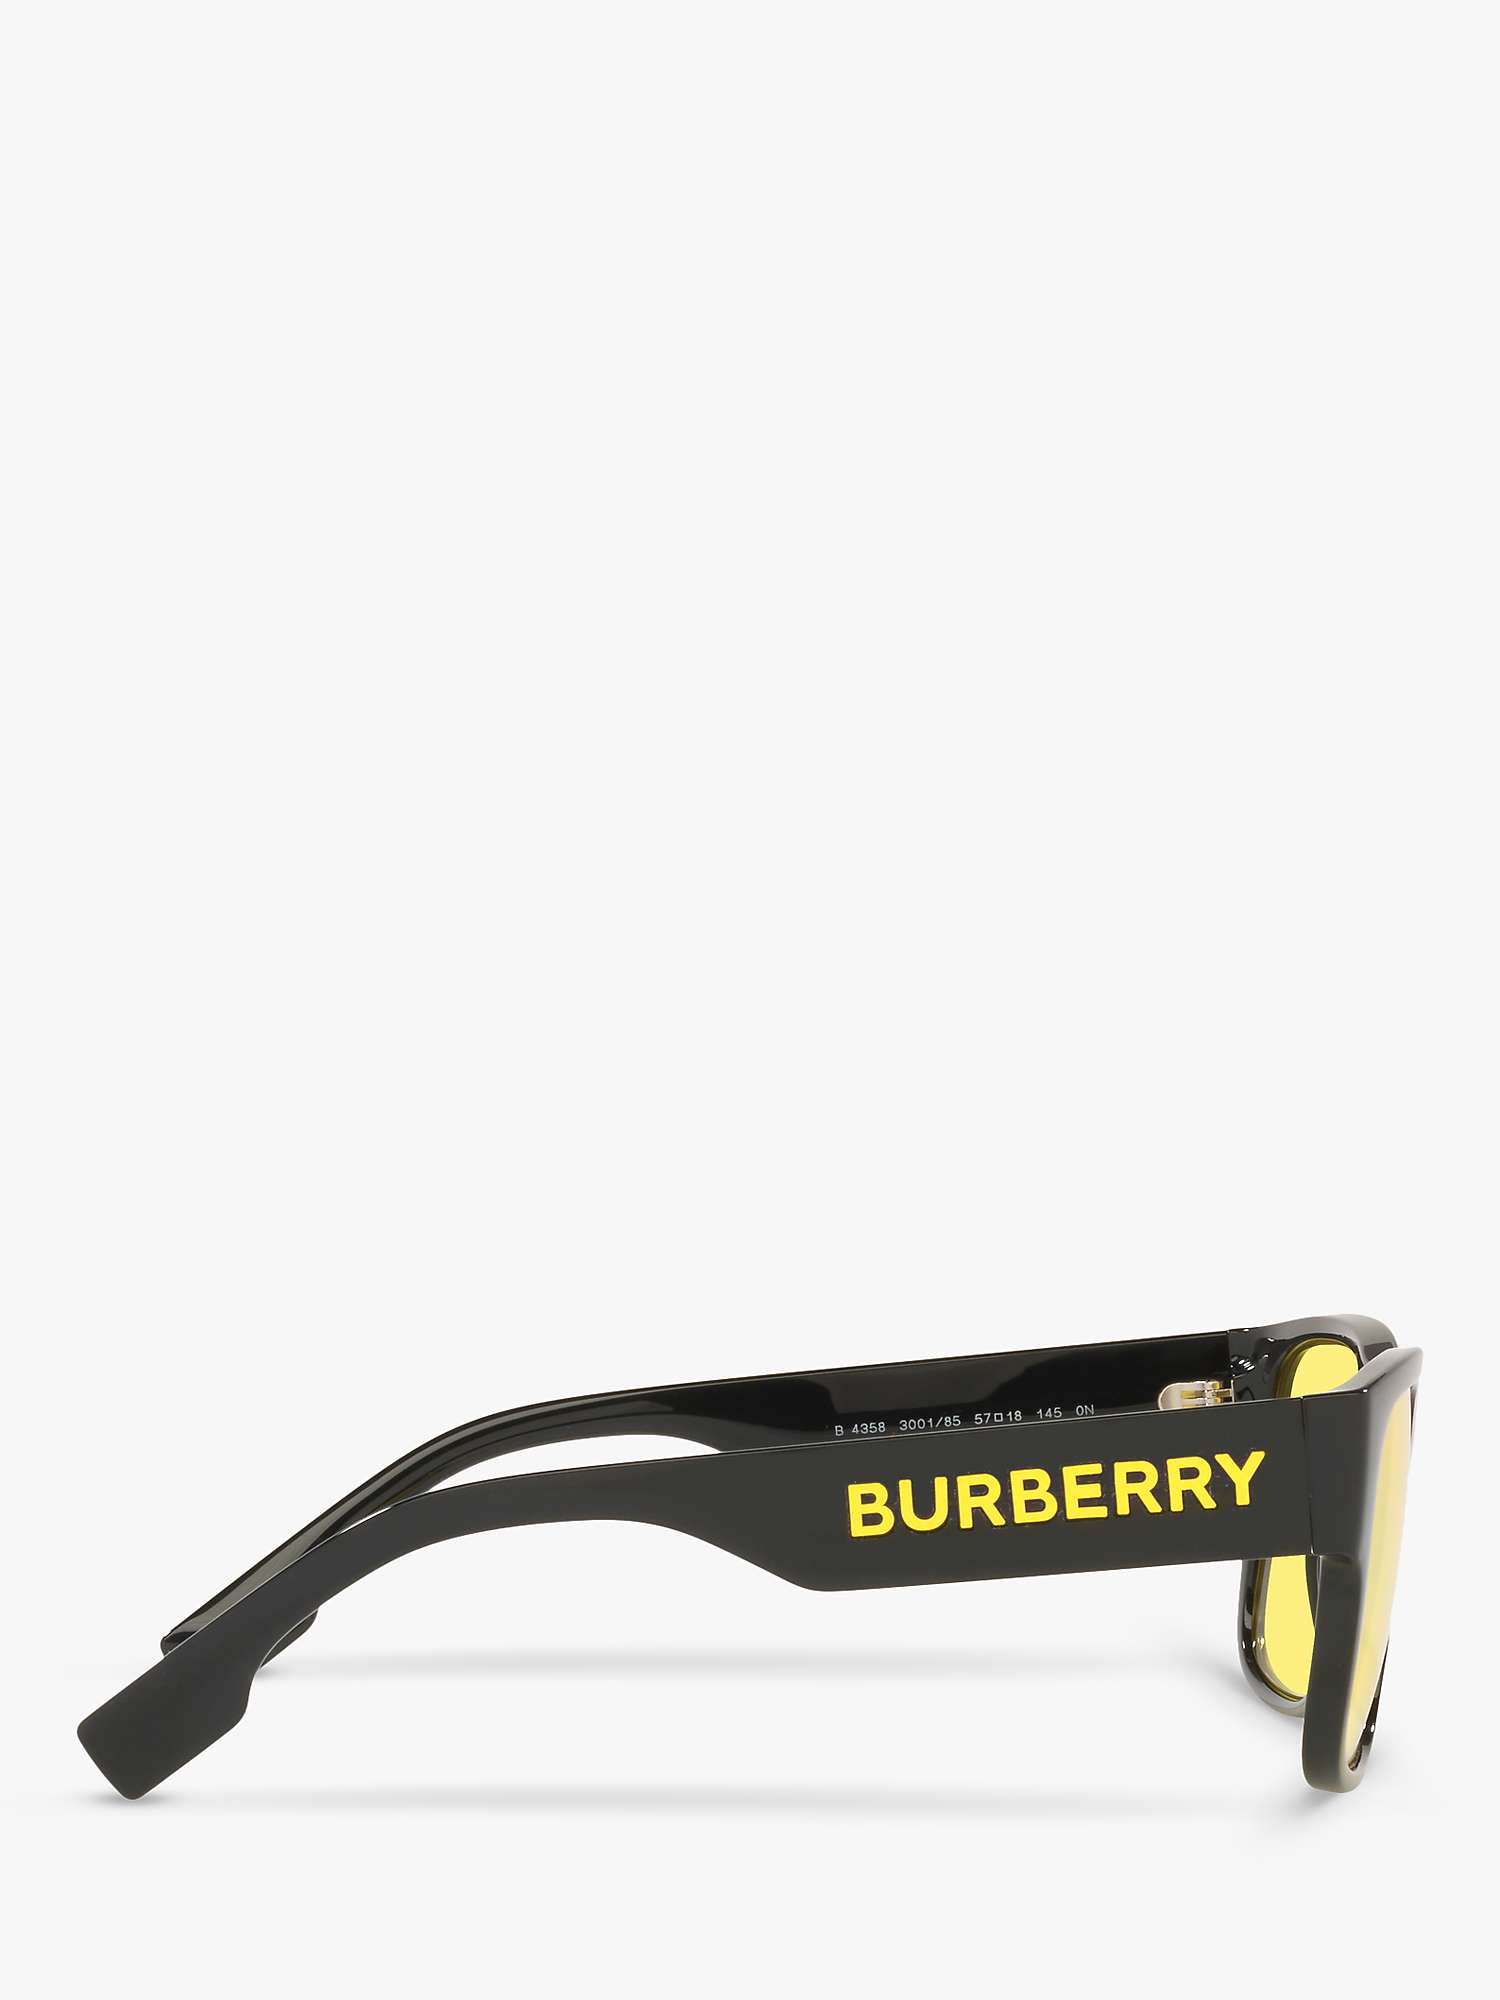 Buy Burberry BE4358 Men's Knight Square Sunglasses, Black/Yellow Online at johnlewis.com